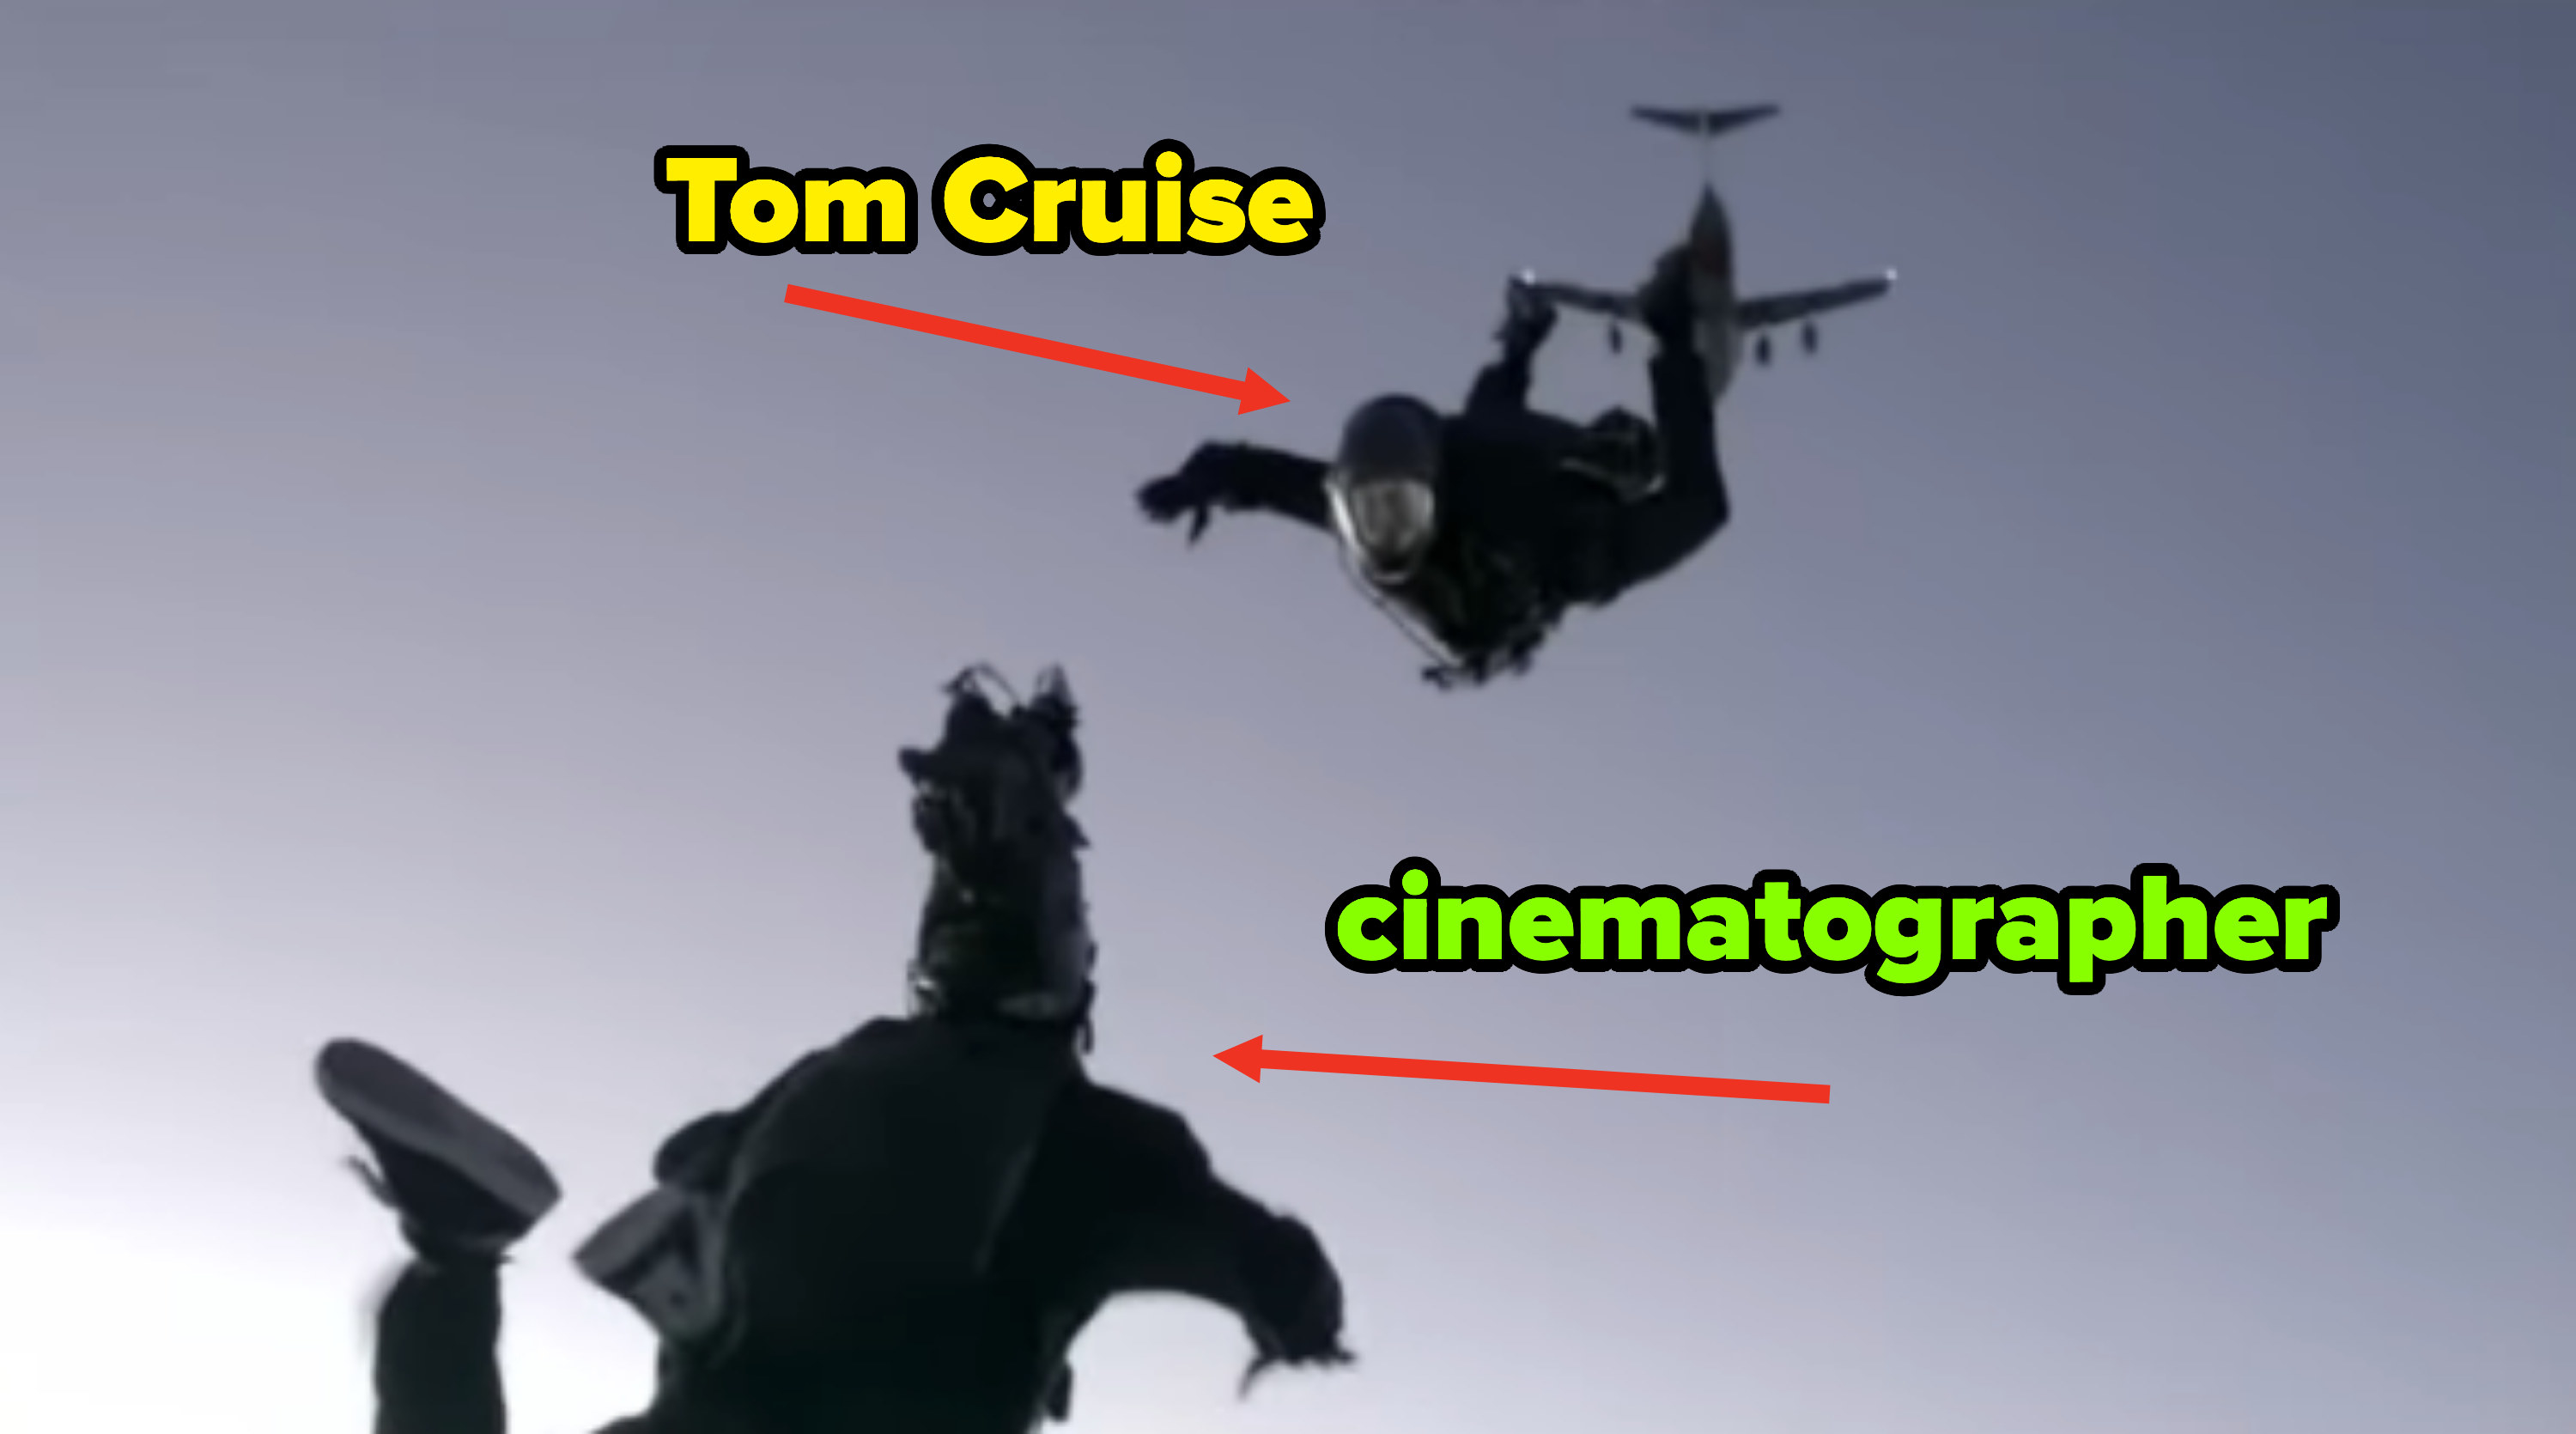 cinematographer and tom cruise in the air